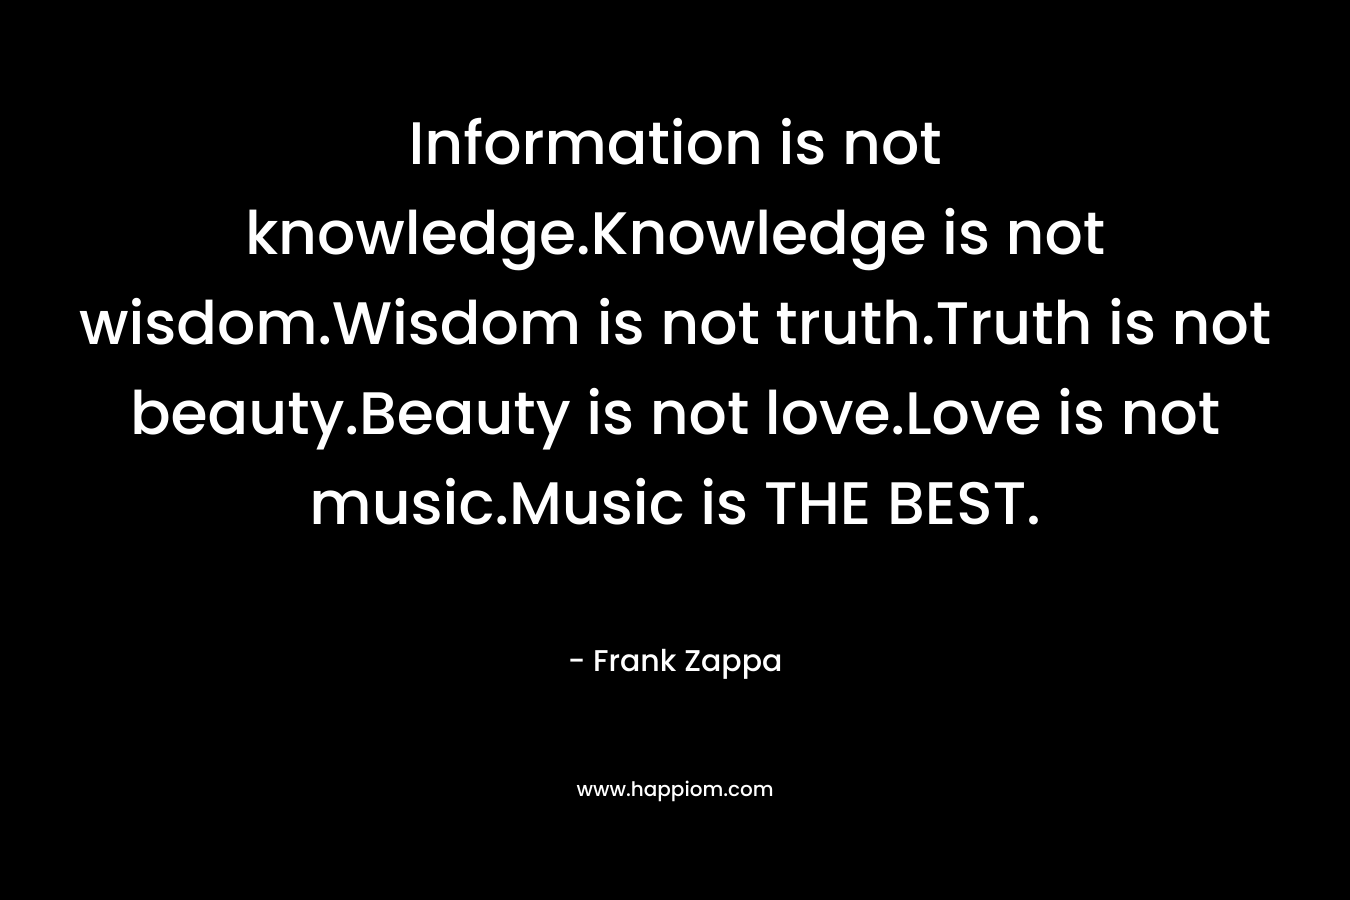 Information is not knowledge.Knowledge is not wisdom.Wisdom is not truth.Truth is not beauty.Beauty is not love.Love is not music.Music is THE BEST.